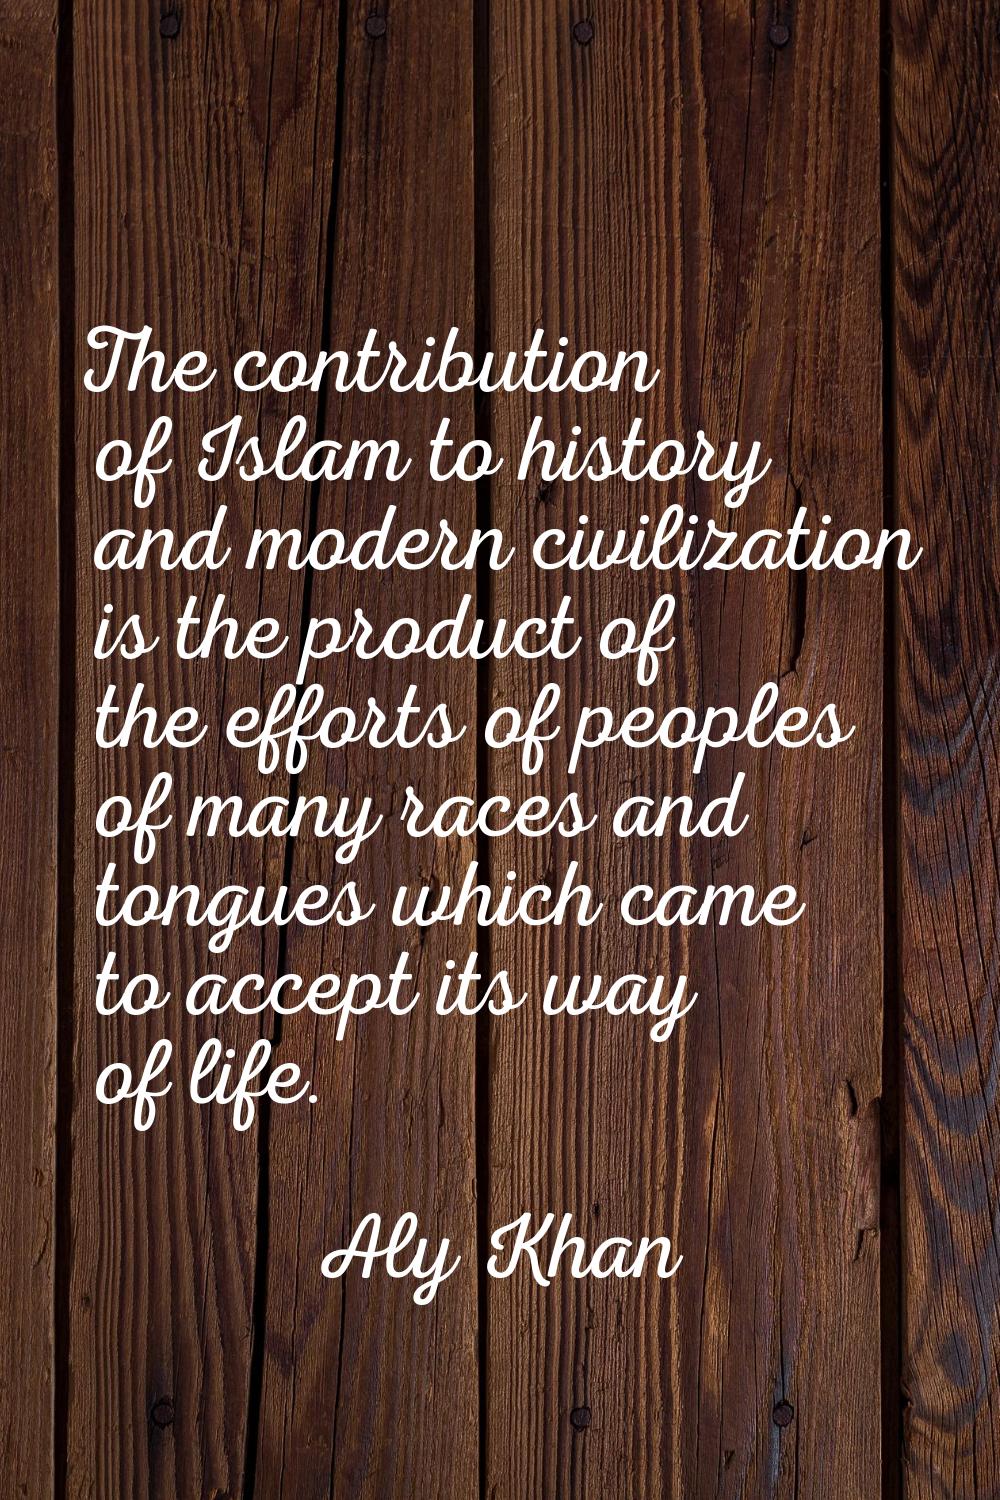 The contribution of Islam to history and modern civilization is the product of the efforts of peopl